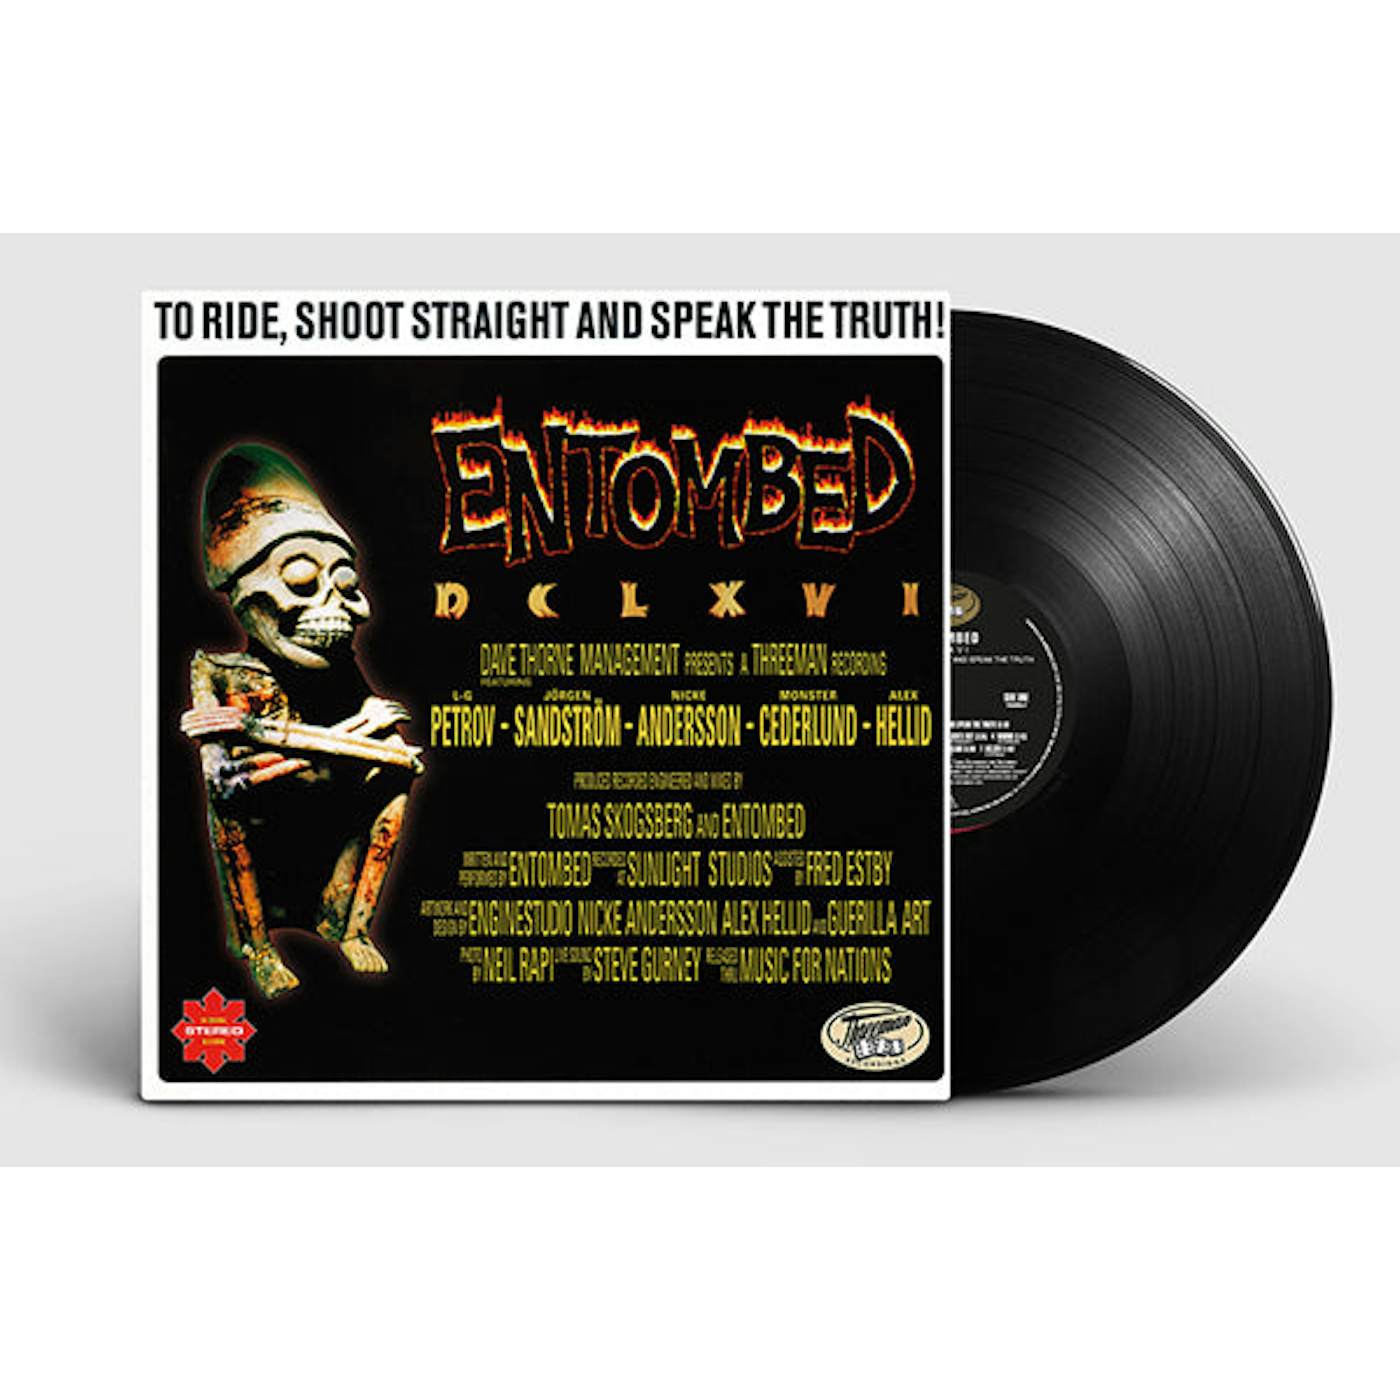 Entombed LP - Dclxvi - To Ride, Shoot Straight And Speak The Truth (Vinyl)